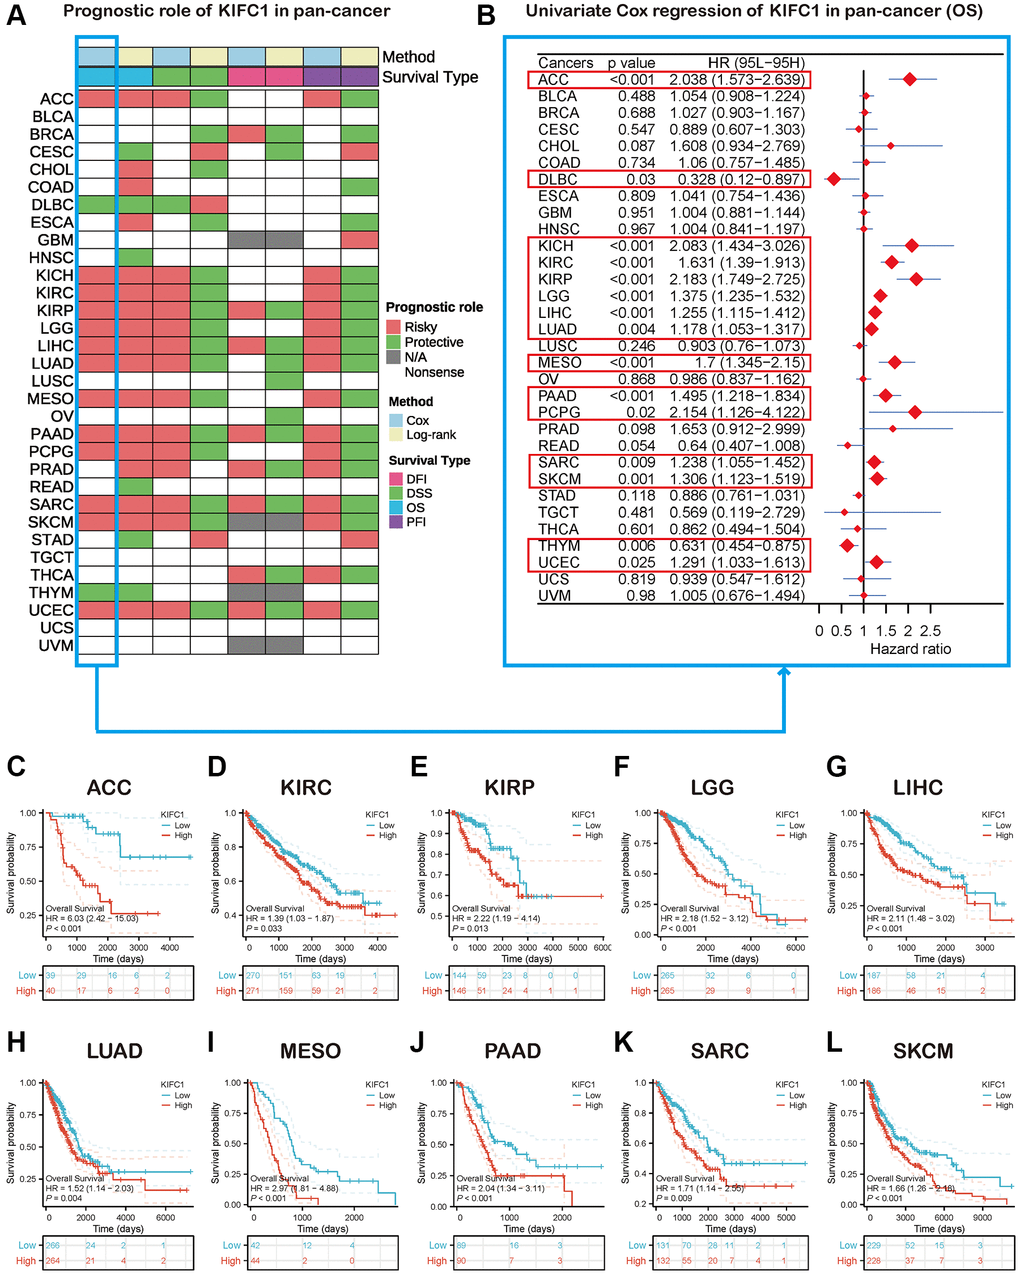 Survival analysis of KIFC1 in the pan-cancer. (A) Summary of the correlation between expression of KIFC1 with overall survival (OS), disease-specific survival (DSS), disease-free interval (DFI), and progression-free interval (PFI) based on the univariate Cox regression and Kaplan-Meier models. (B) The forest plot exhibited the prognostic role of KIFC1 in cancers by the univariate Cox regression method. (C–L) Kaplan-Meier overall survival curves of KIFC1 in ACC, KIRC, KIRP, LGG, LIHC, LUAD, MESO, PAAD, SARC, and SKCM.